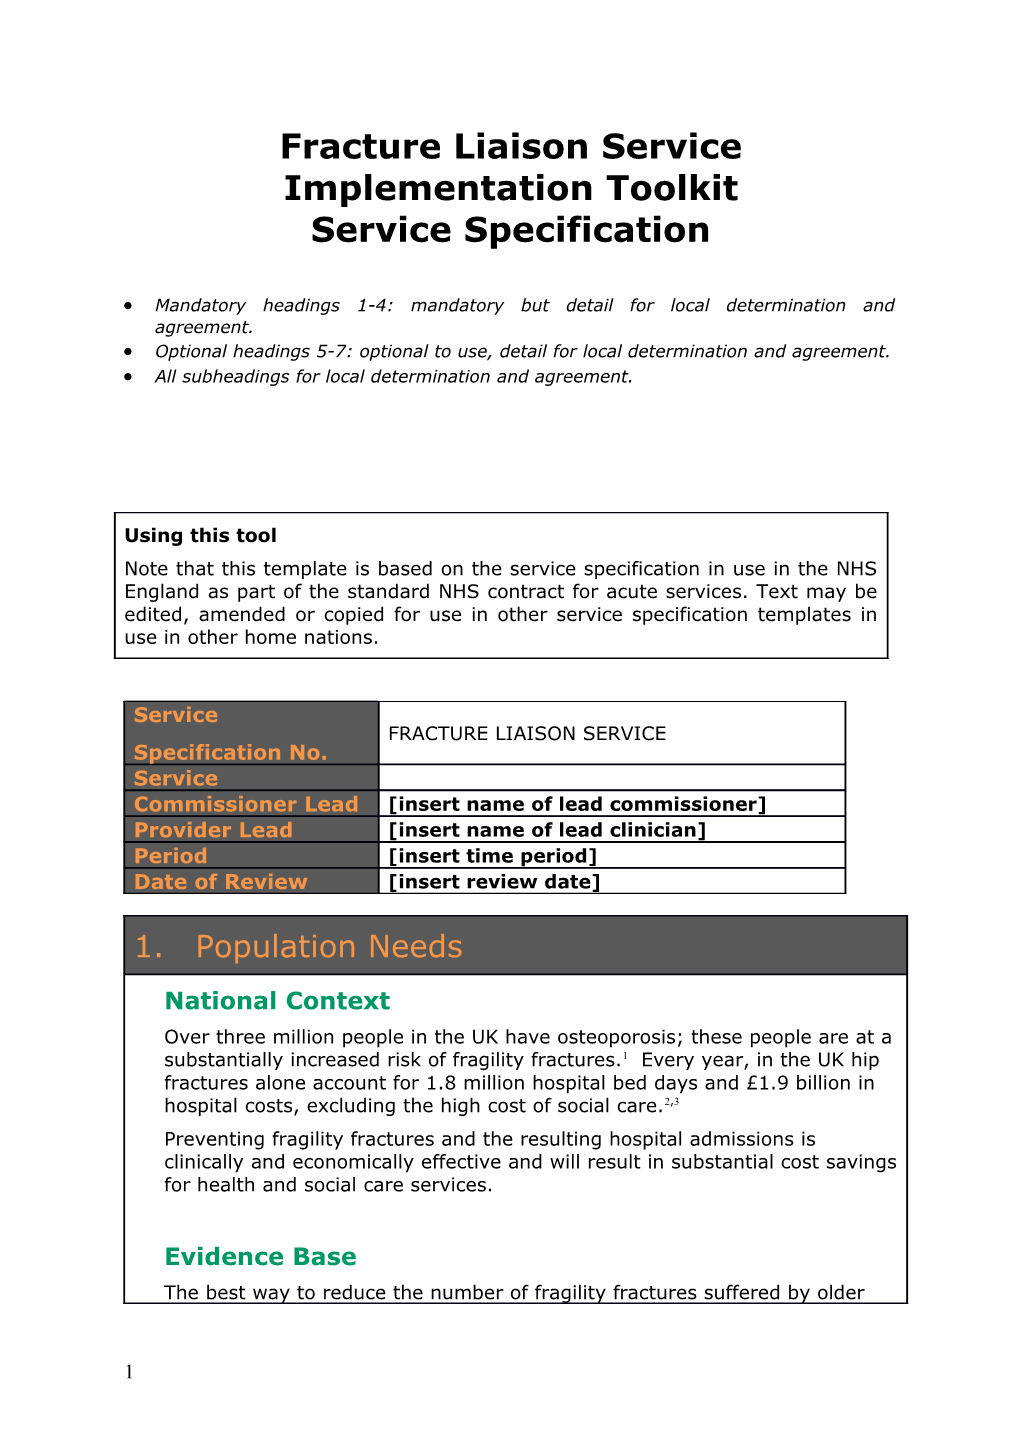 Fracture Liaison Service Implementation Toolkit